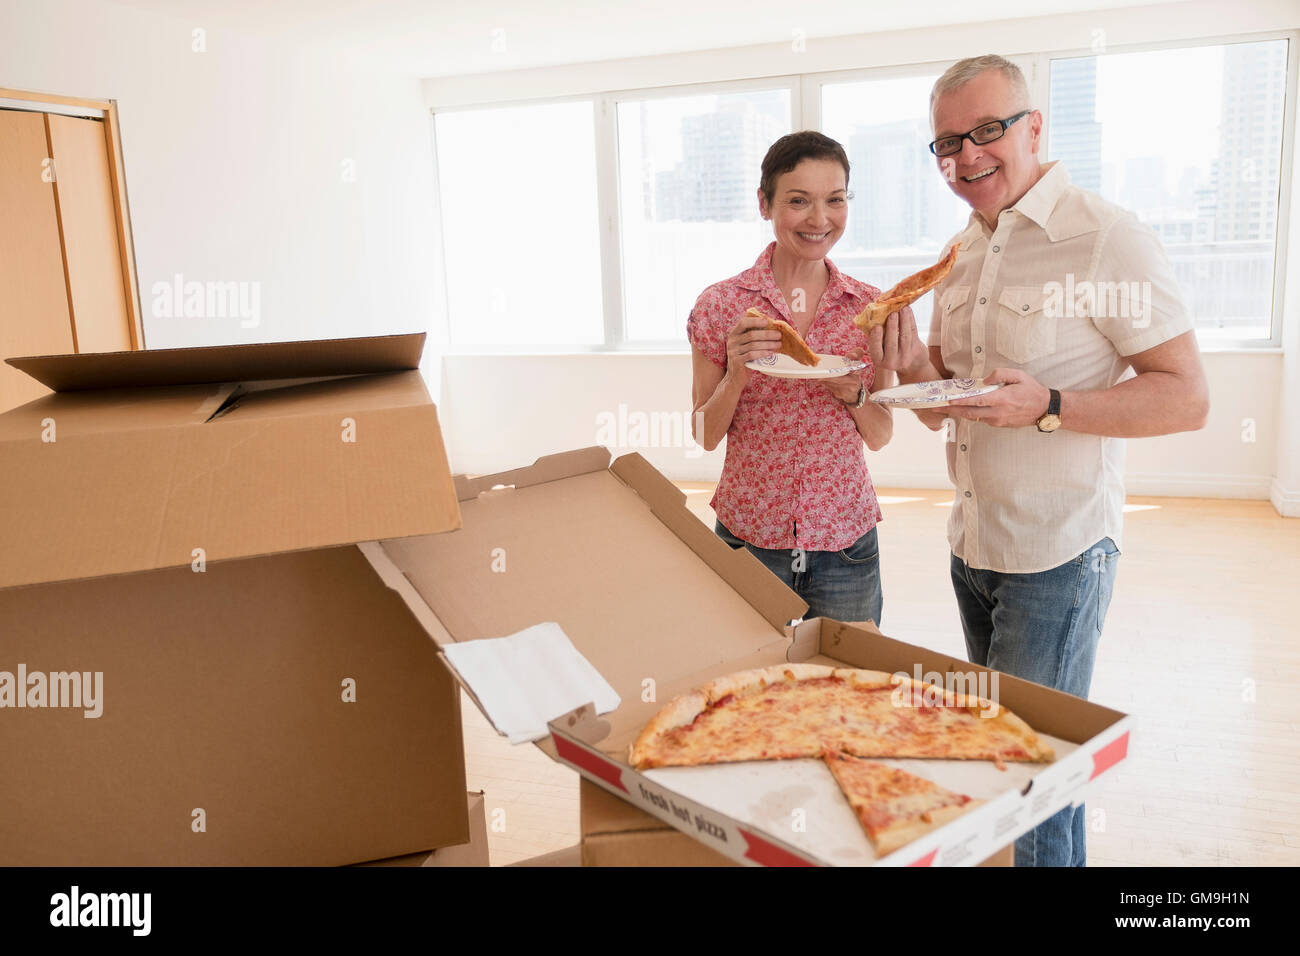 Portrait of smiling couple eating pizza in new apartment Stock Photo